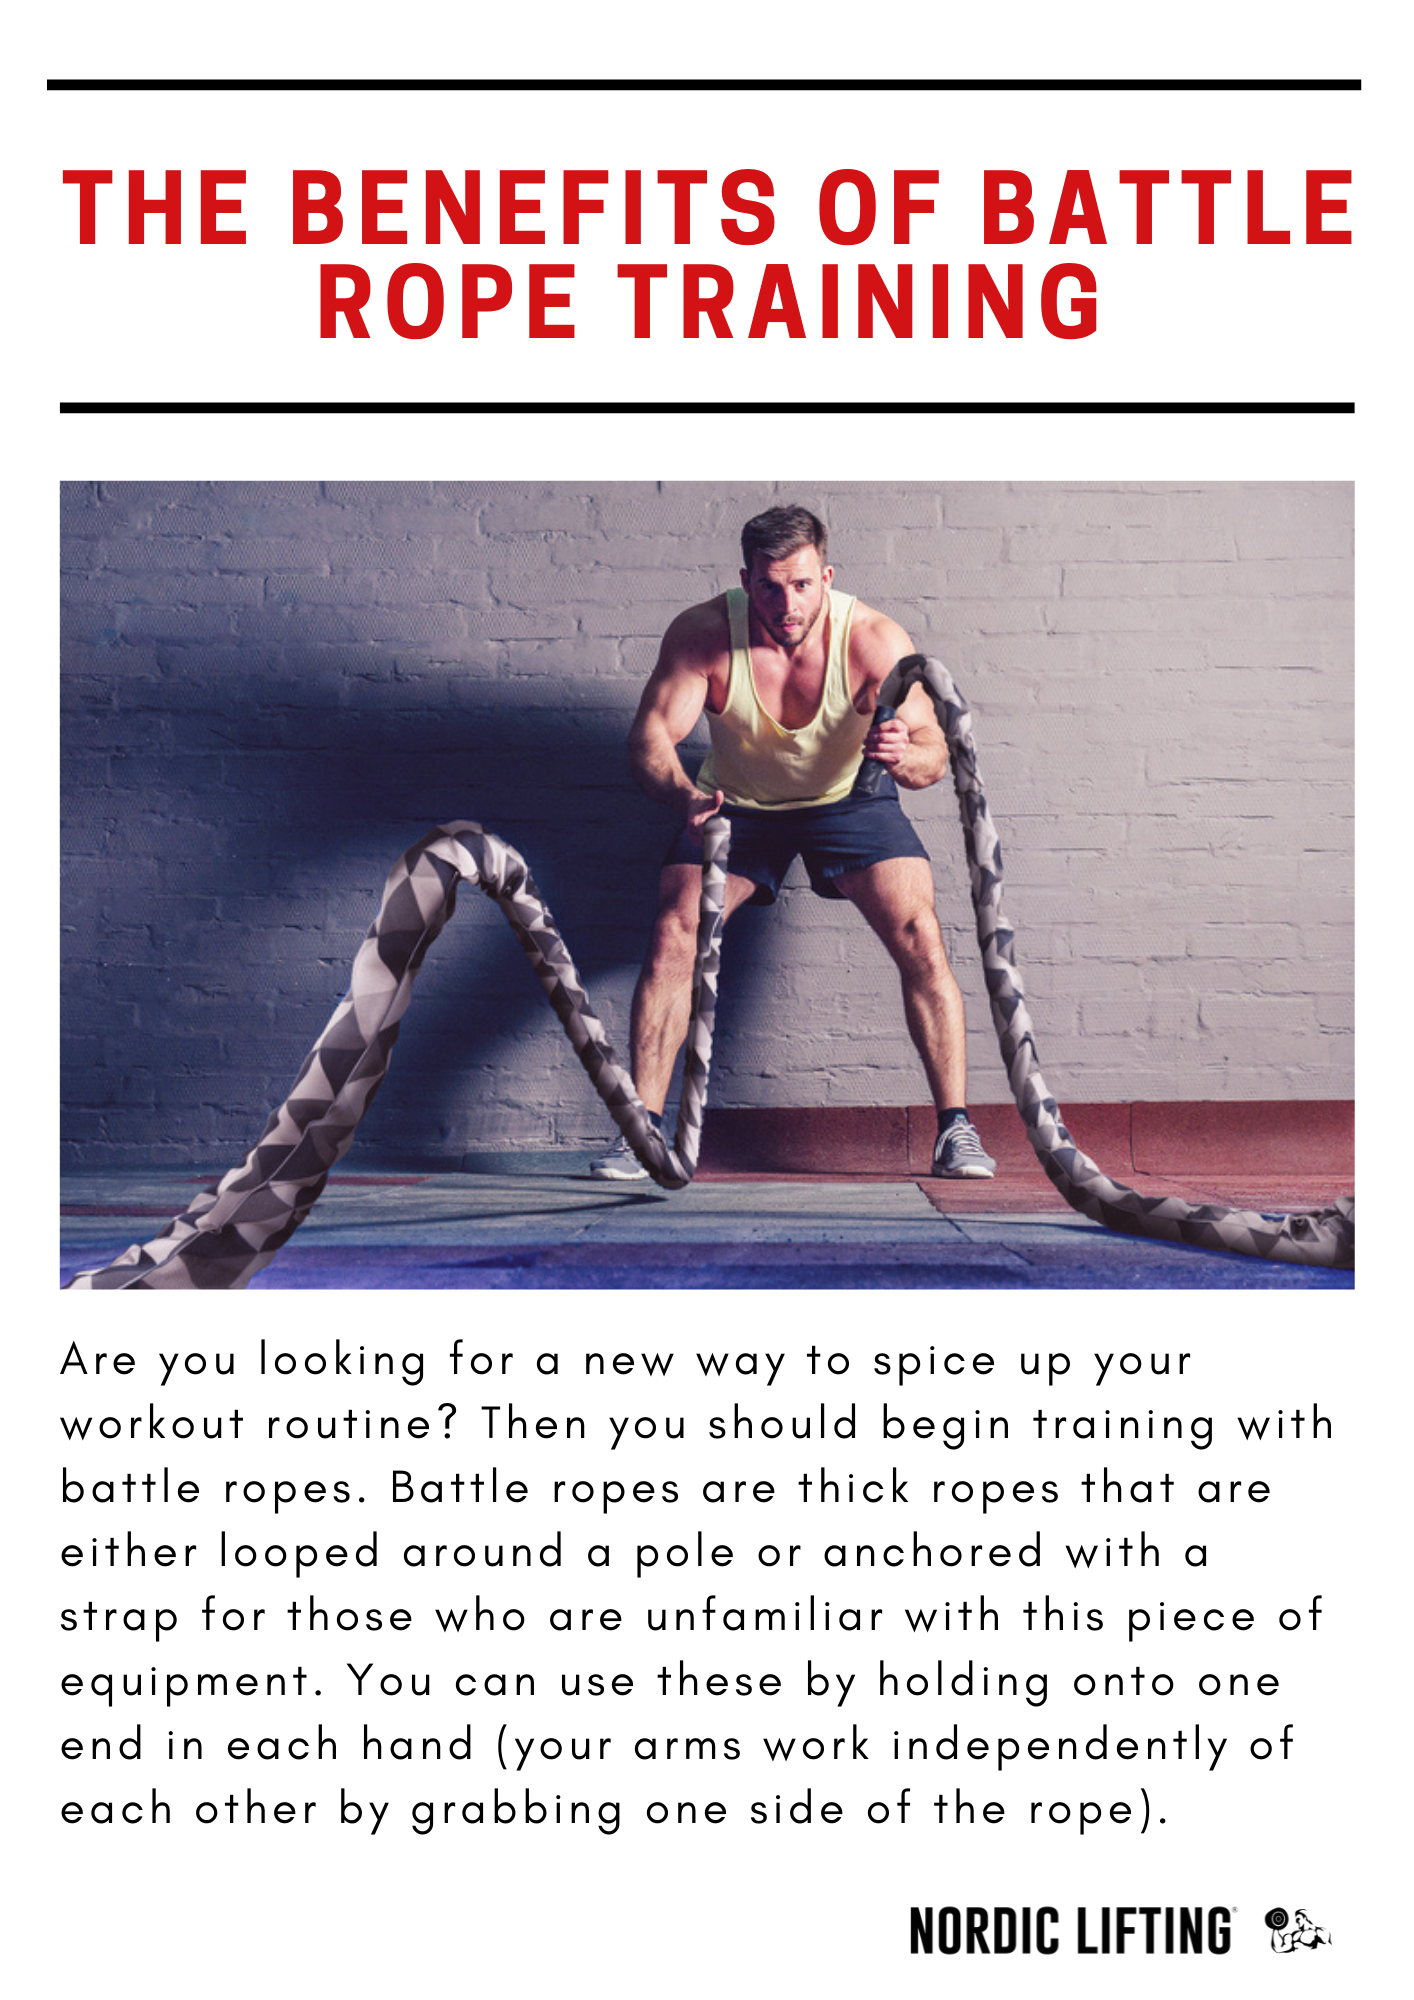 Nordic Lifting: Top Benefits Of Incorporating Battle Rope Into